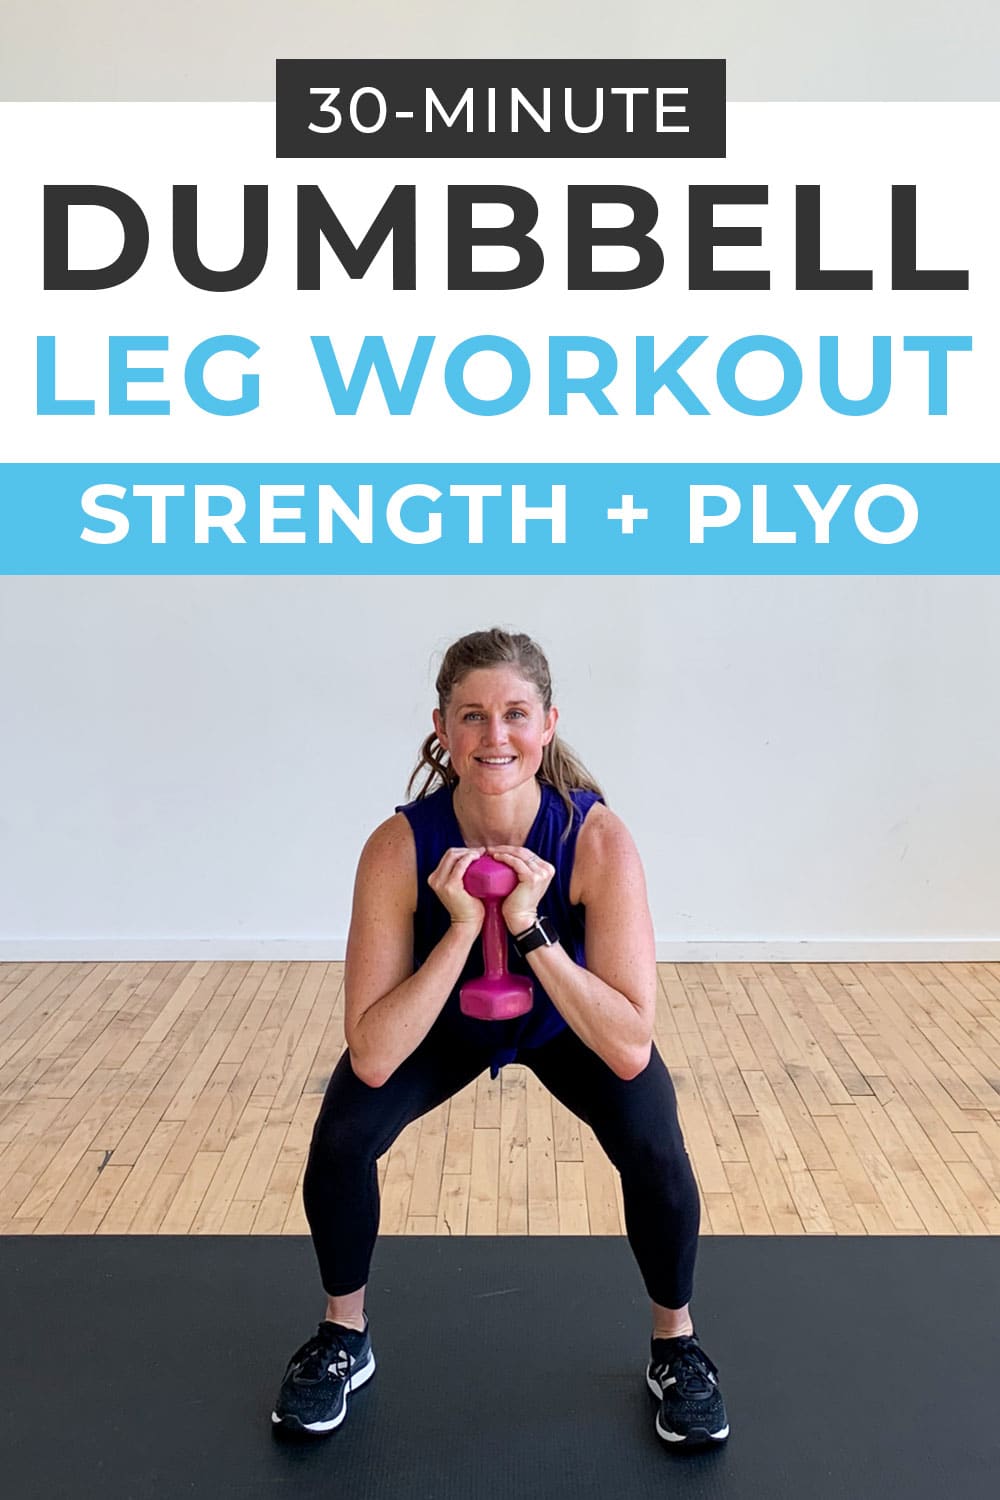 5 Day Lower body workout dvd for push your ABS